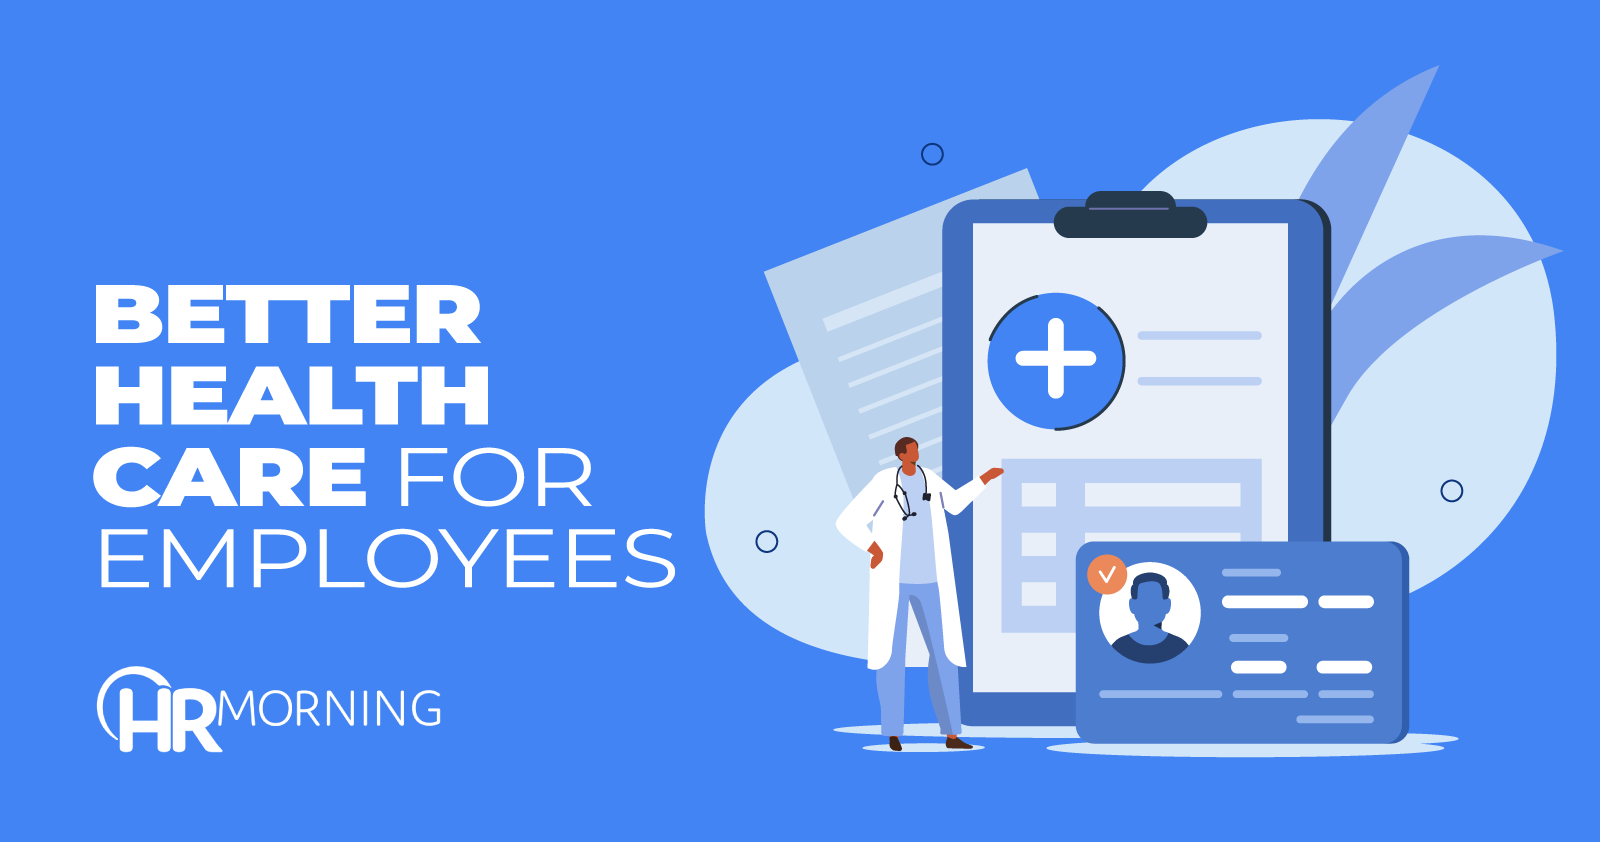 Better health care for employees